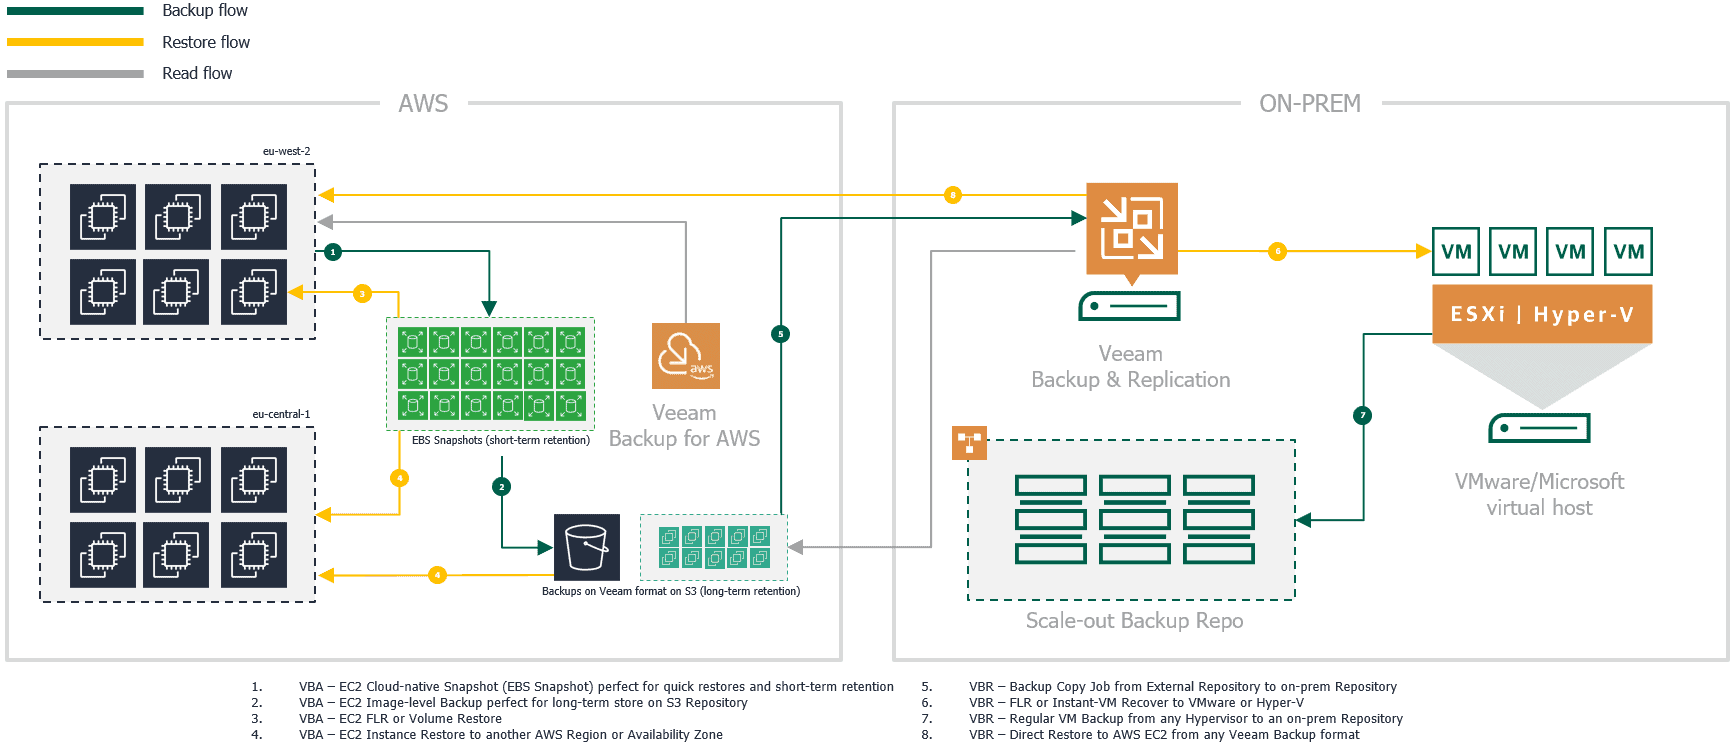 veeam backup and replication 11 release notes